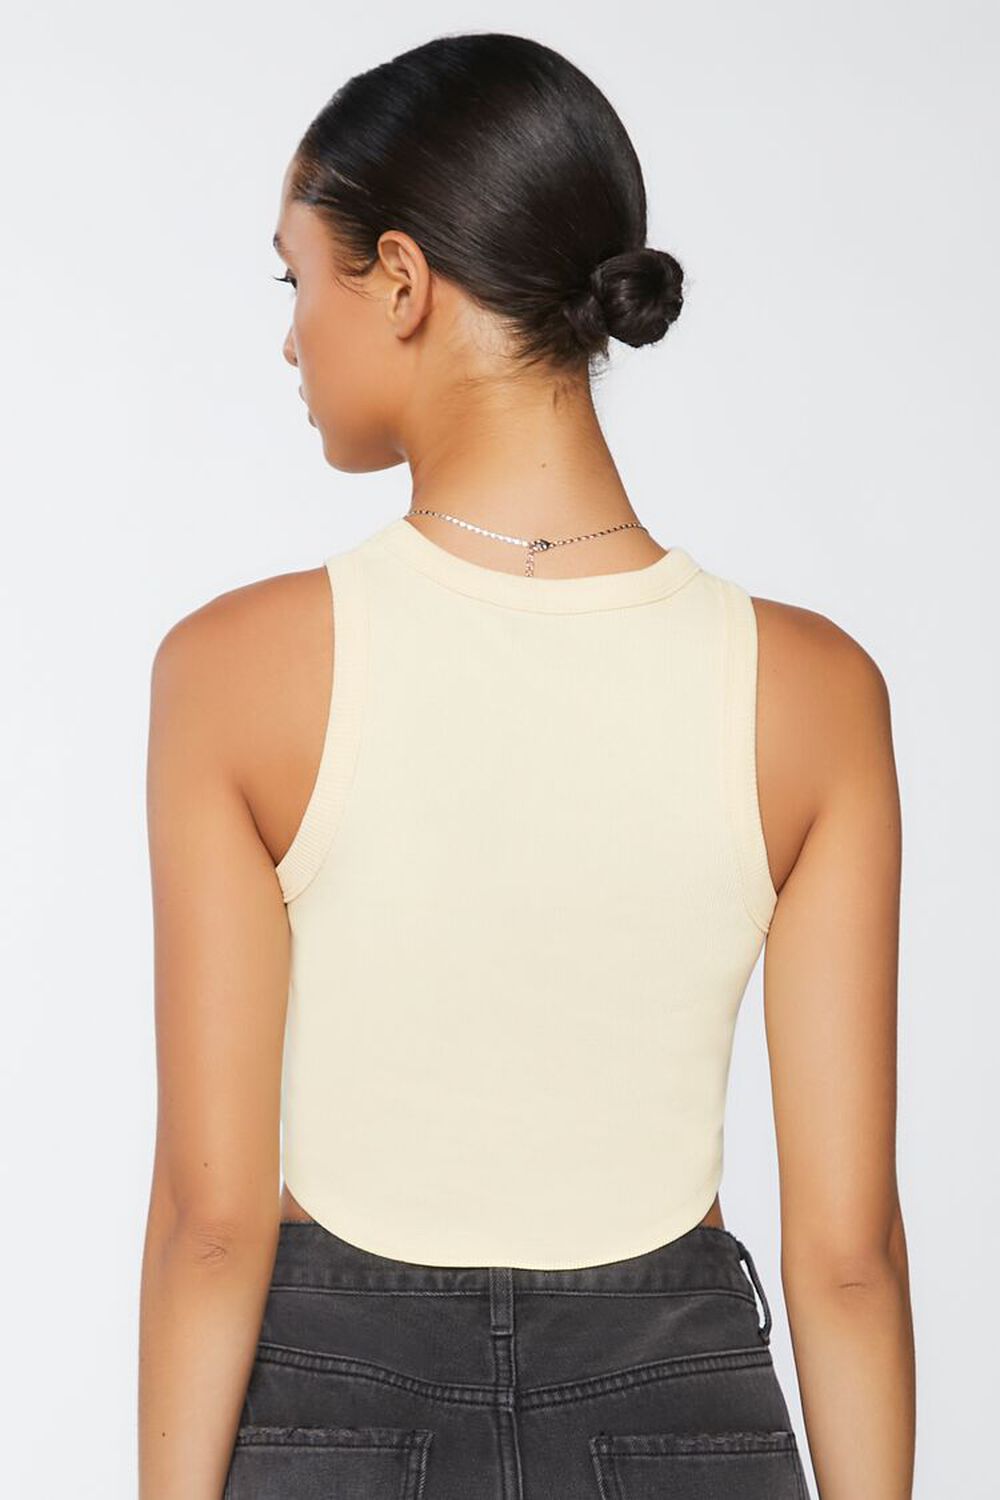 PALE YELLOW Cropped Tank Top, image 3